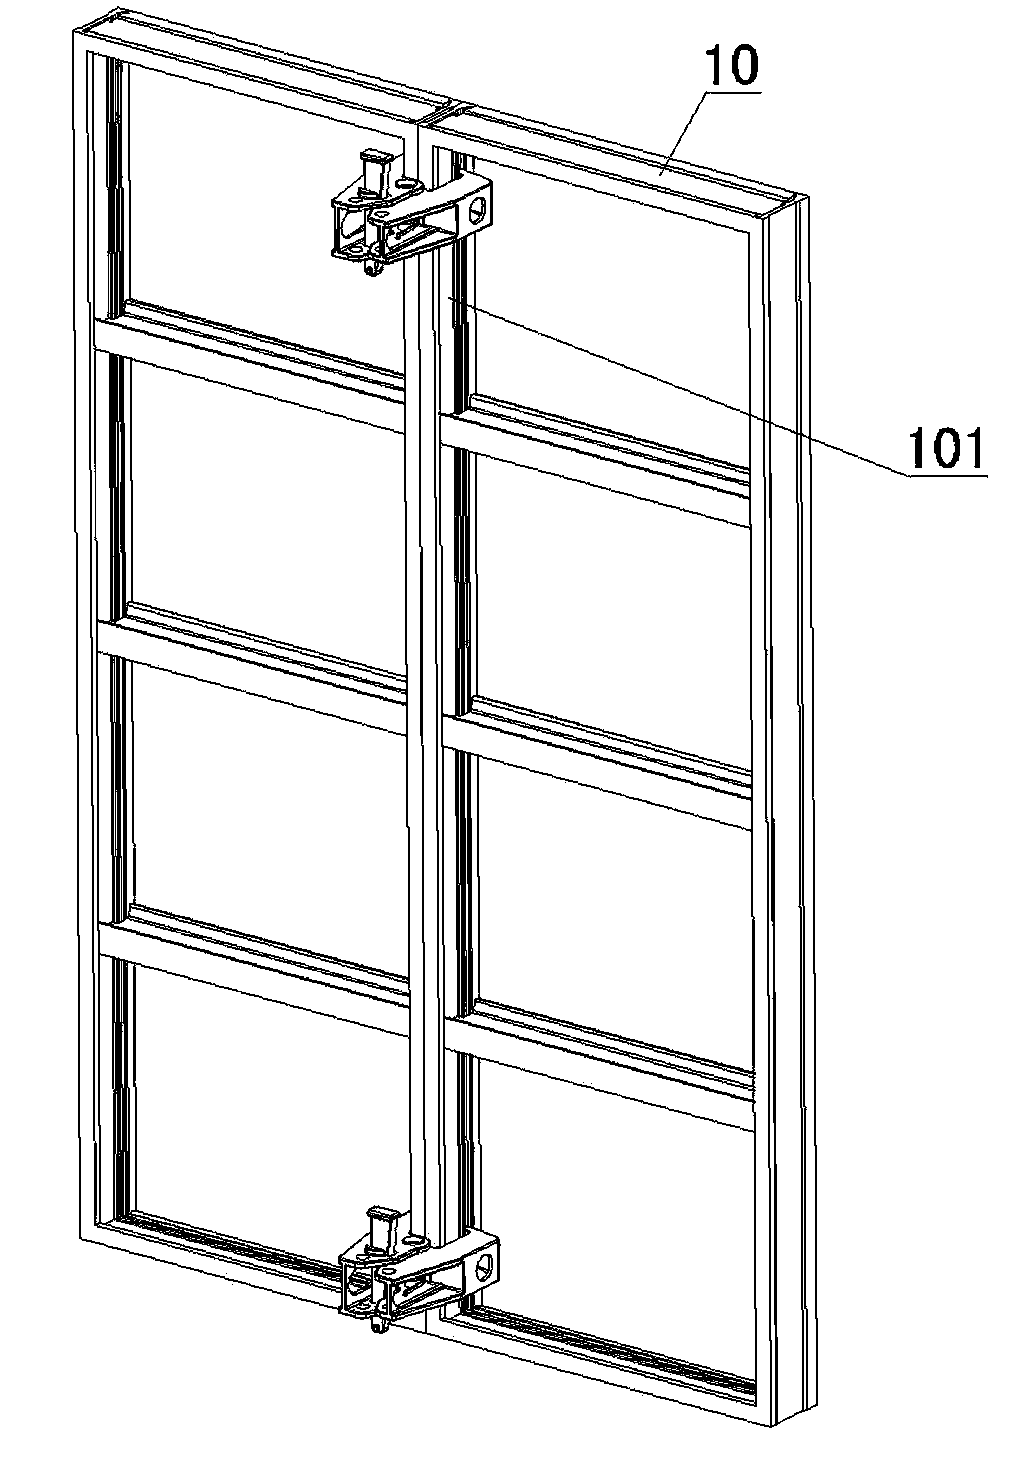 Connecting clamp for template splicing